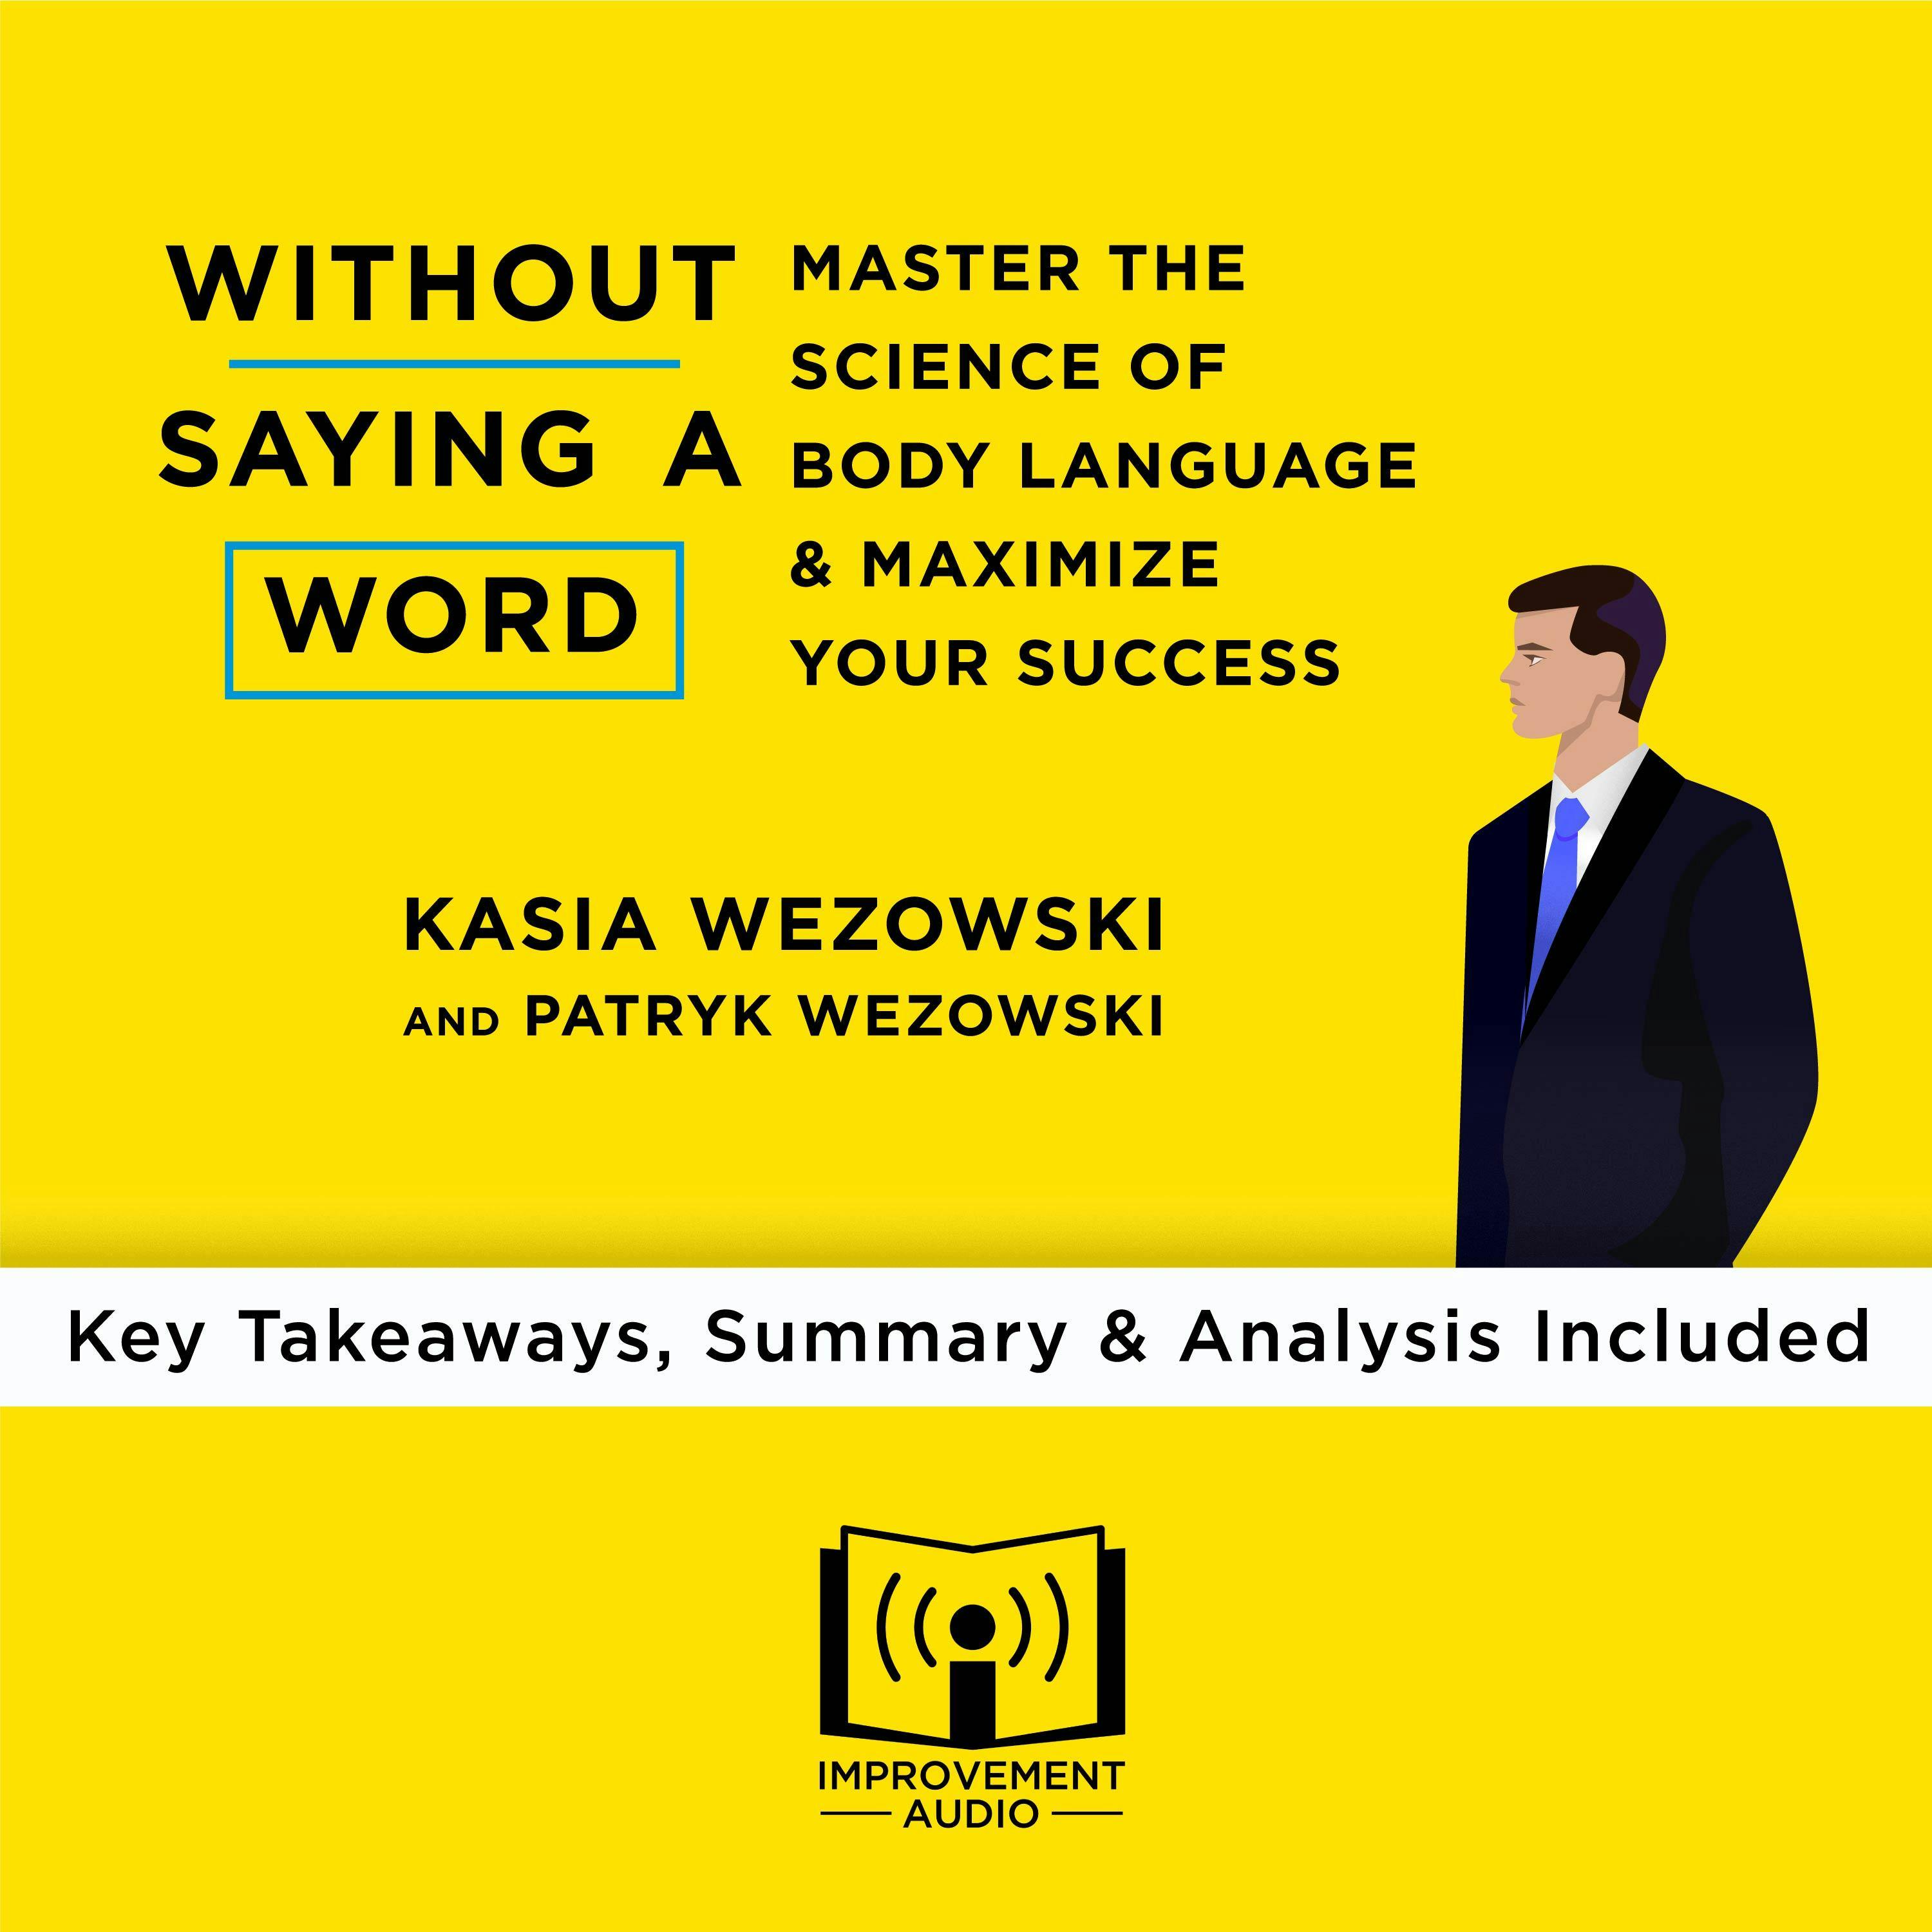 Summary of Without Saying a Word: Master the Science of Body Language and Maximize Your Success by Kasia Wezowski and Patryk Wezowski: Key Takeaways, Summary & Analysis Included - undefined